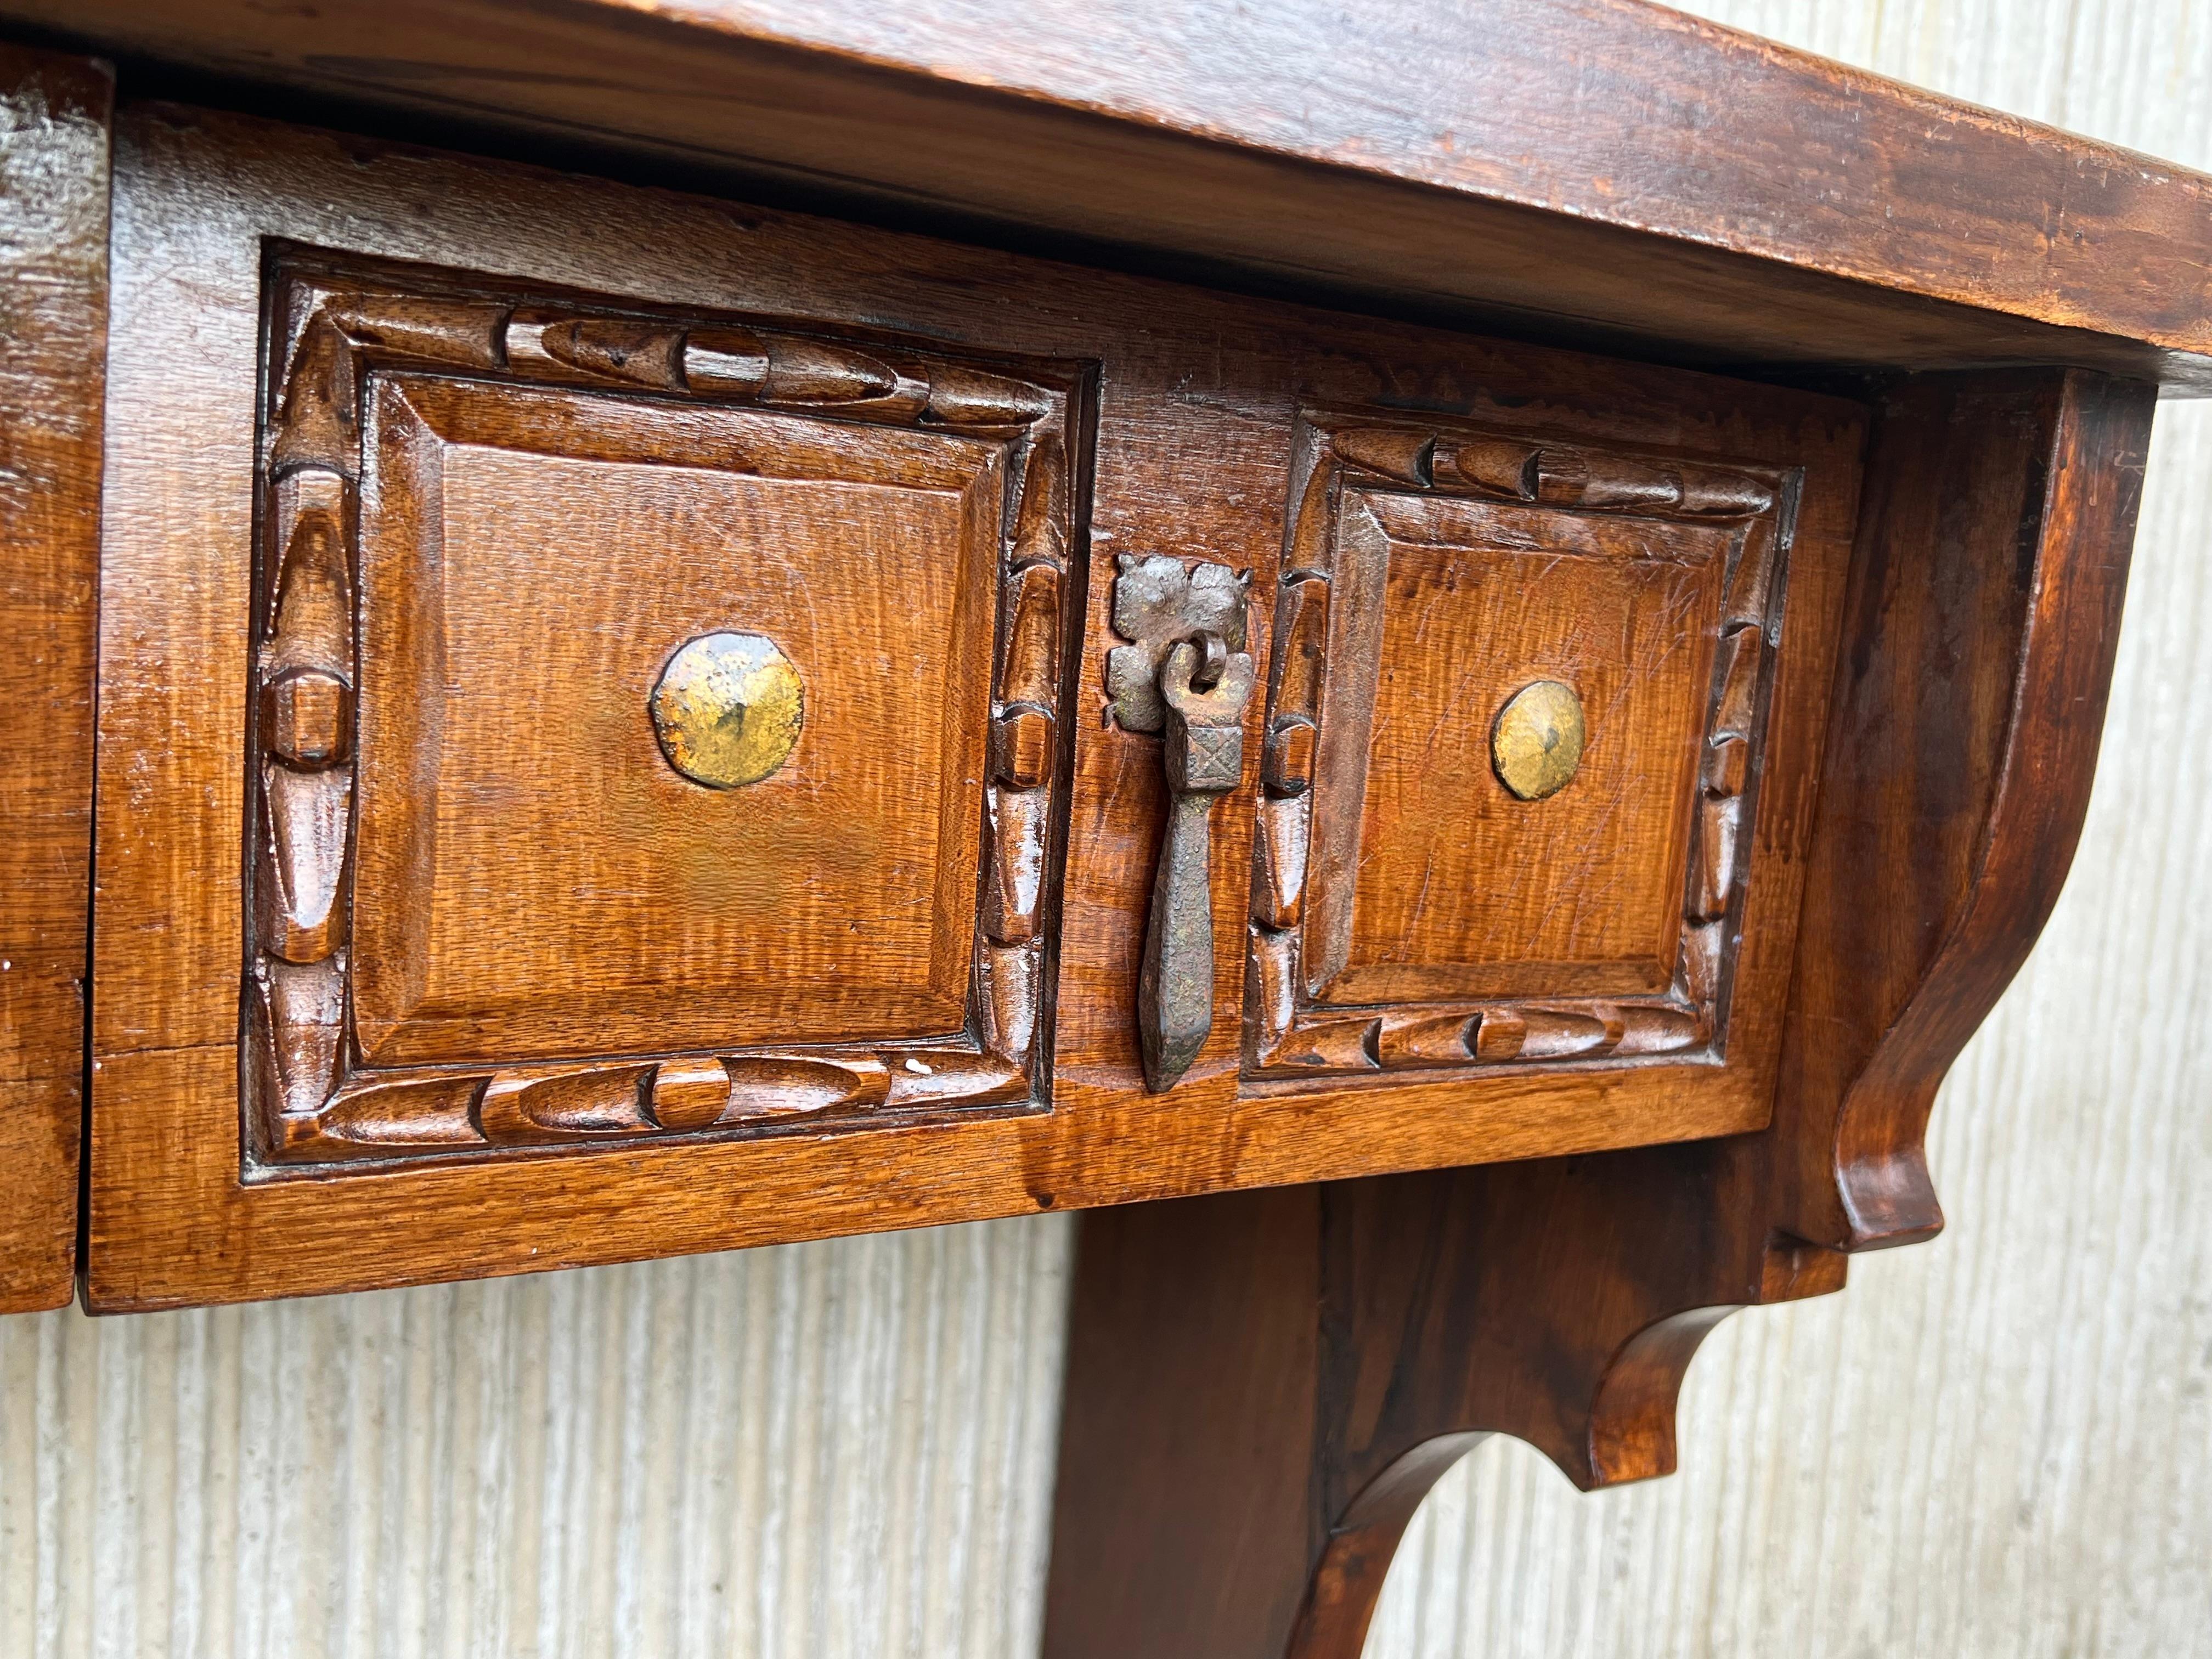 Spanish Colonial Narrow Console Table with Two Drawers with Iron Hardware For Sale 4